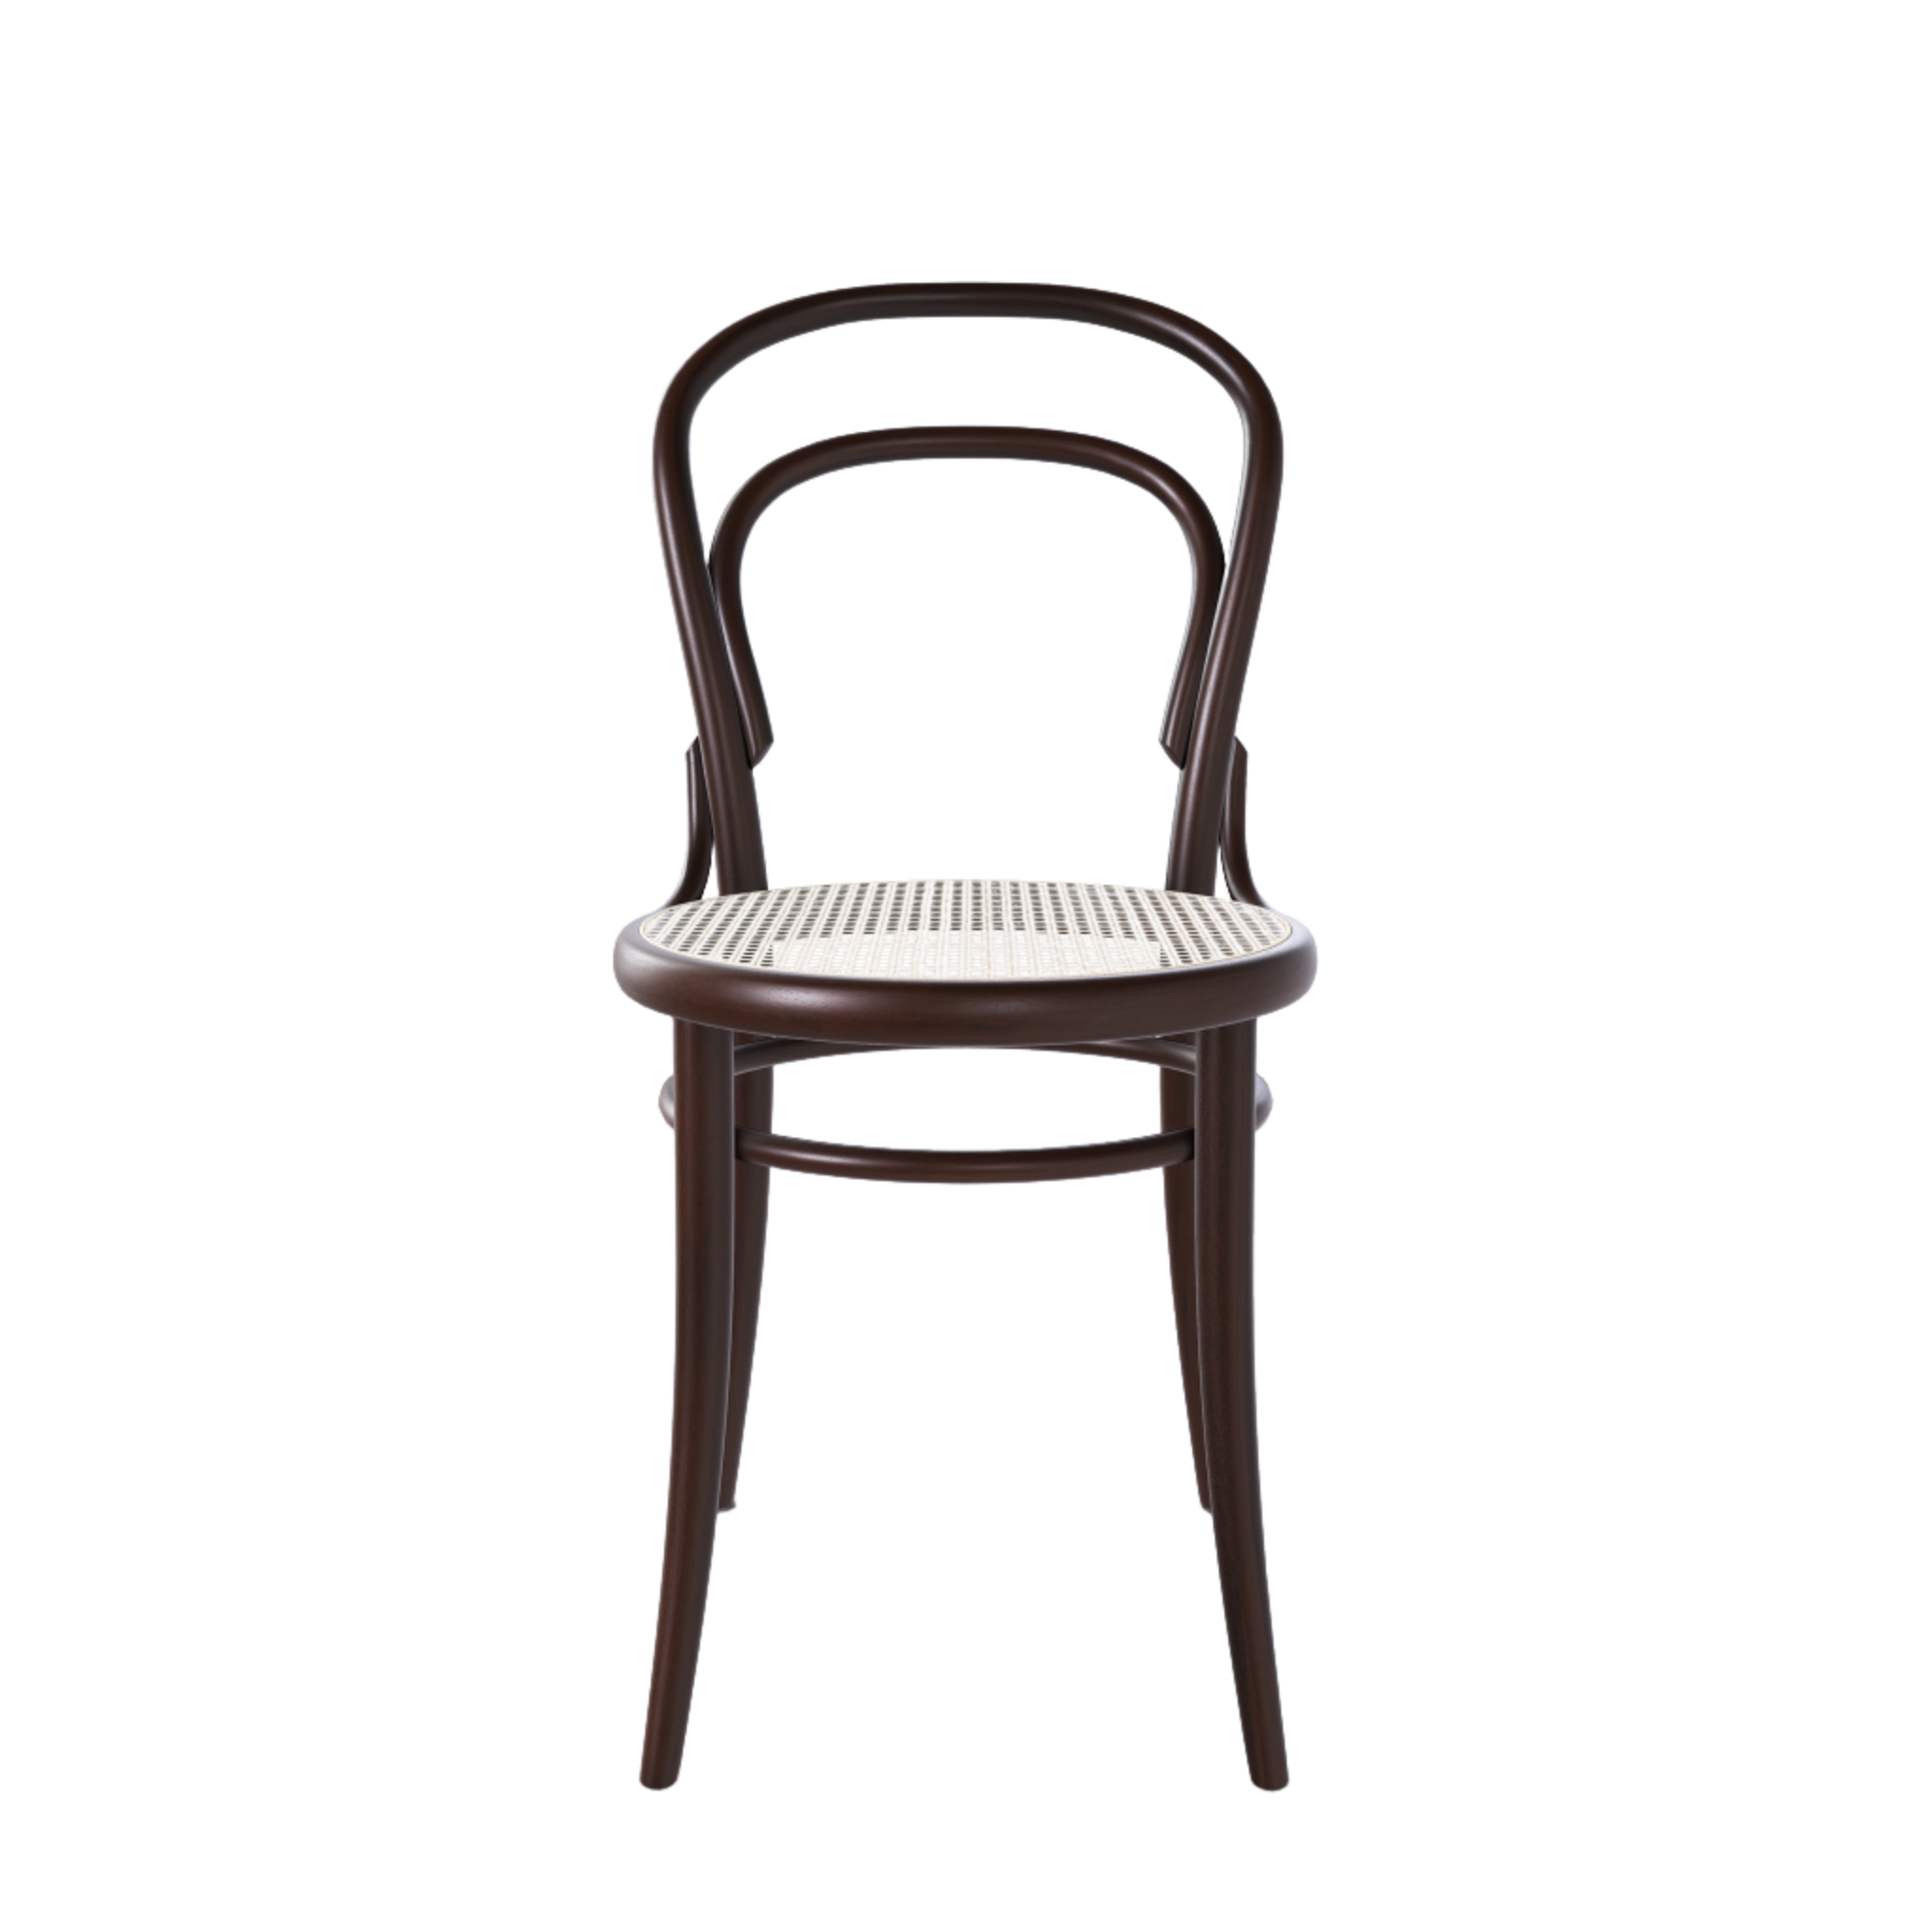 Ton 14 Dining Chair with cane seat in dark chocolate